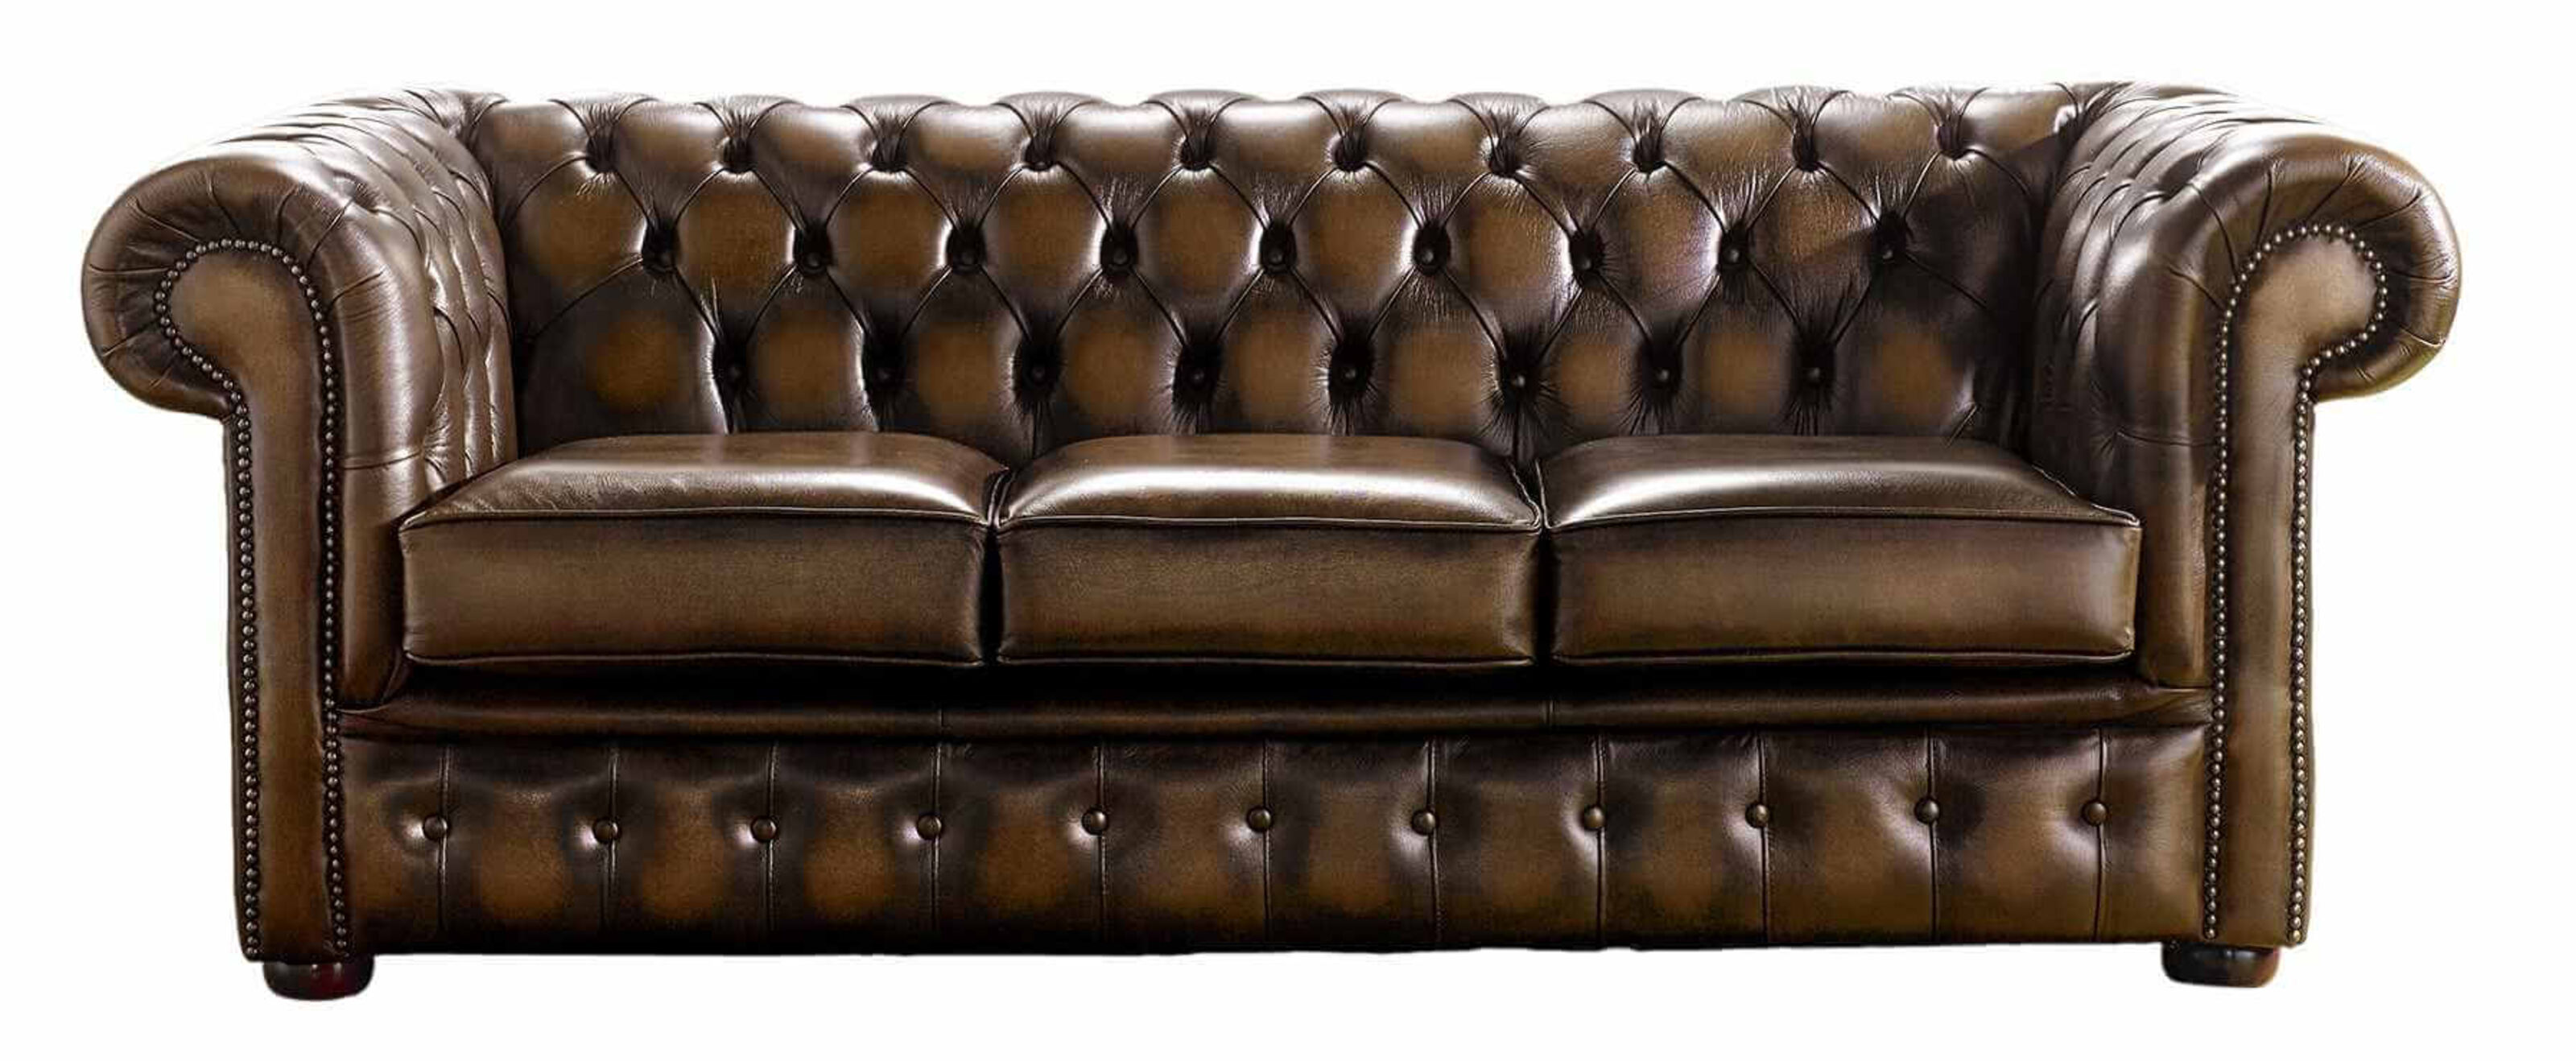 Embracing the Beauty of Leather Sofas  %Post Title